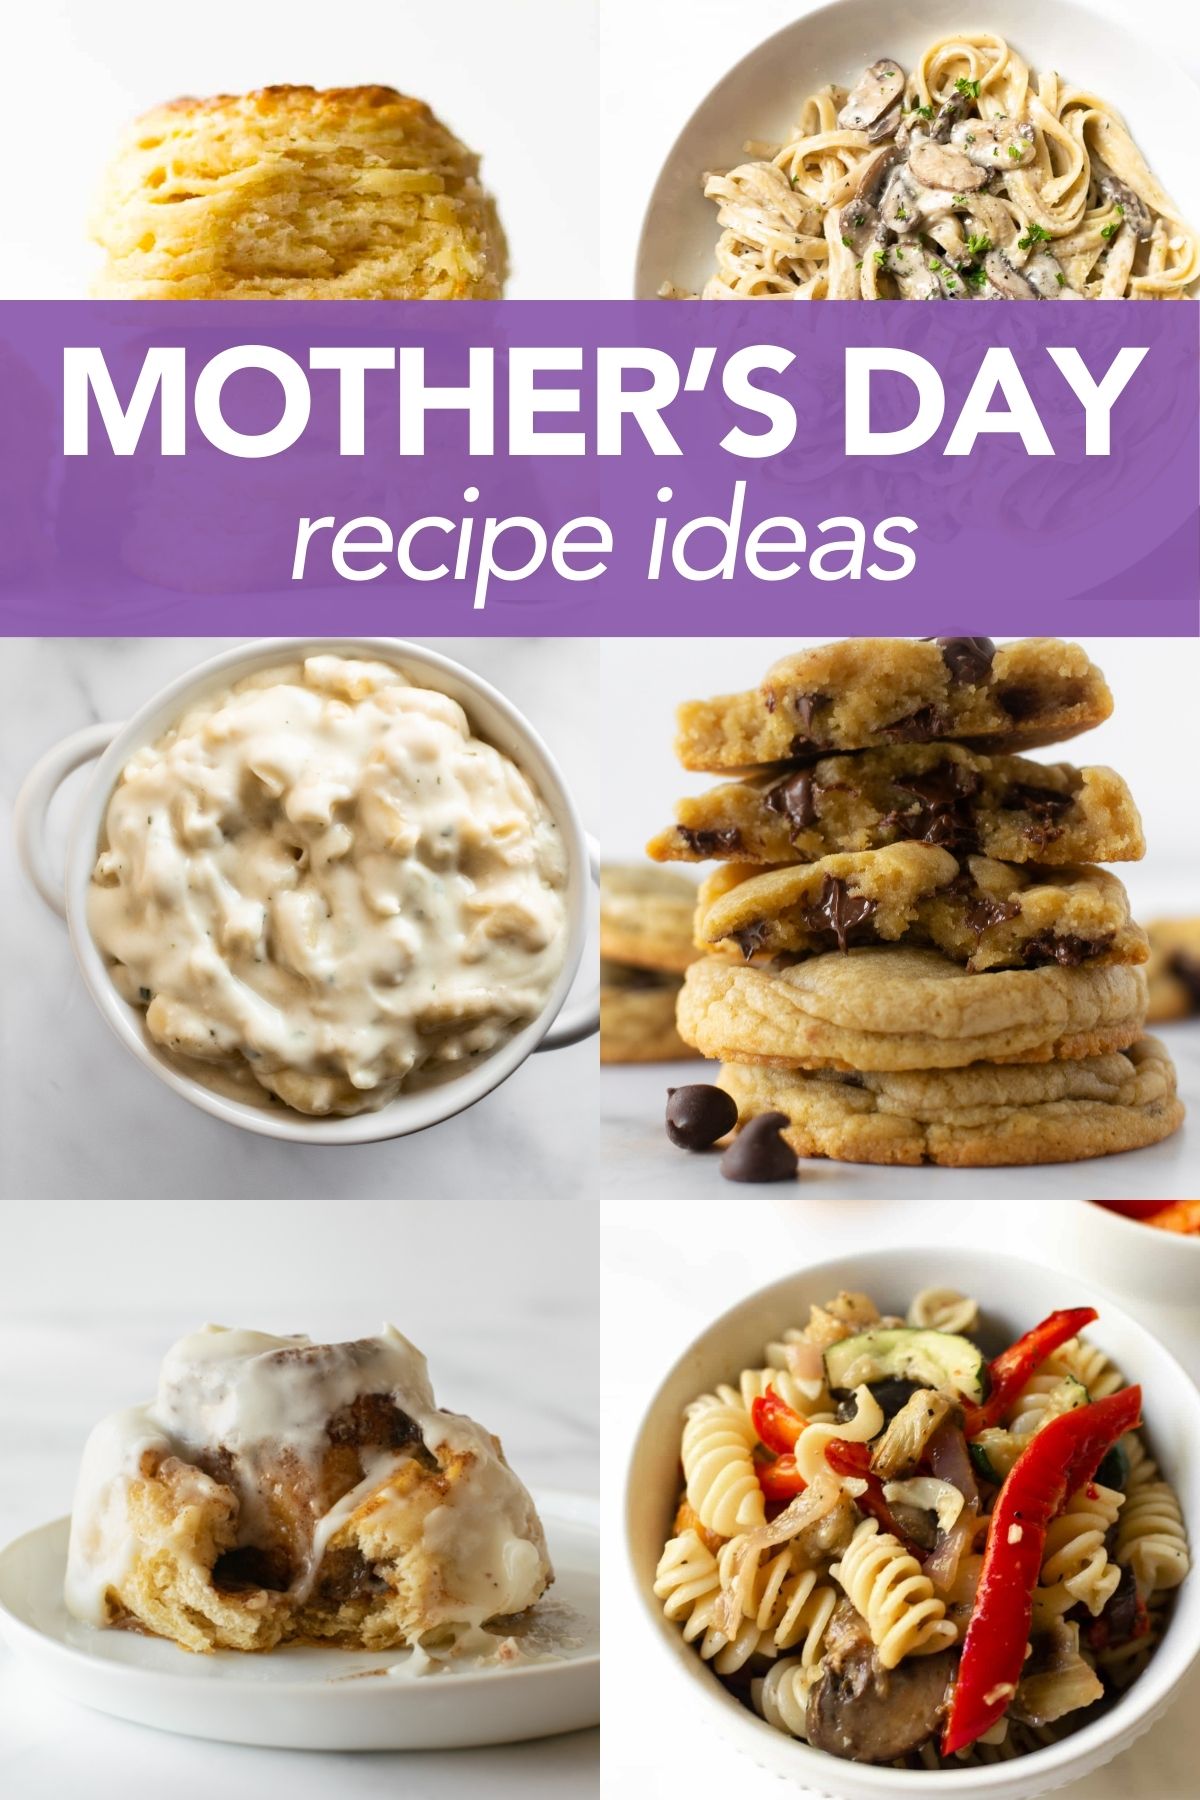 mother's day recipes including biscuits, creamy mushroom pasta, macaroni and cheese, cookies, cinnamon rolls and pasta salad.